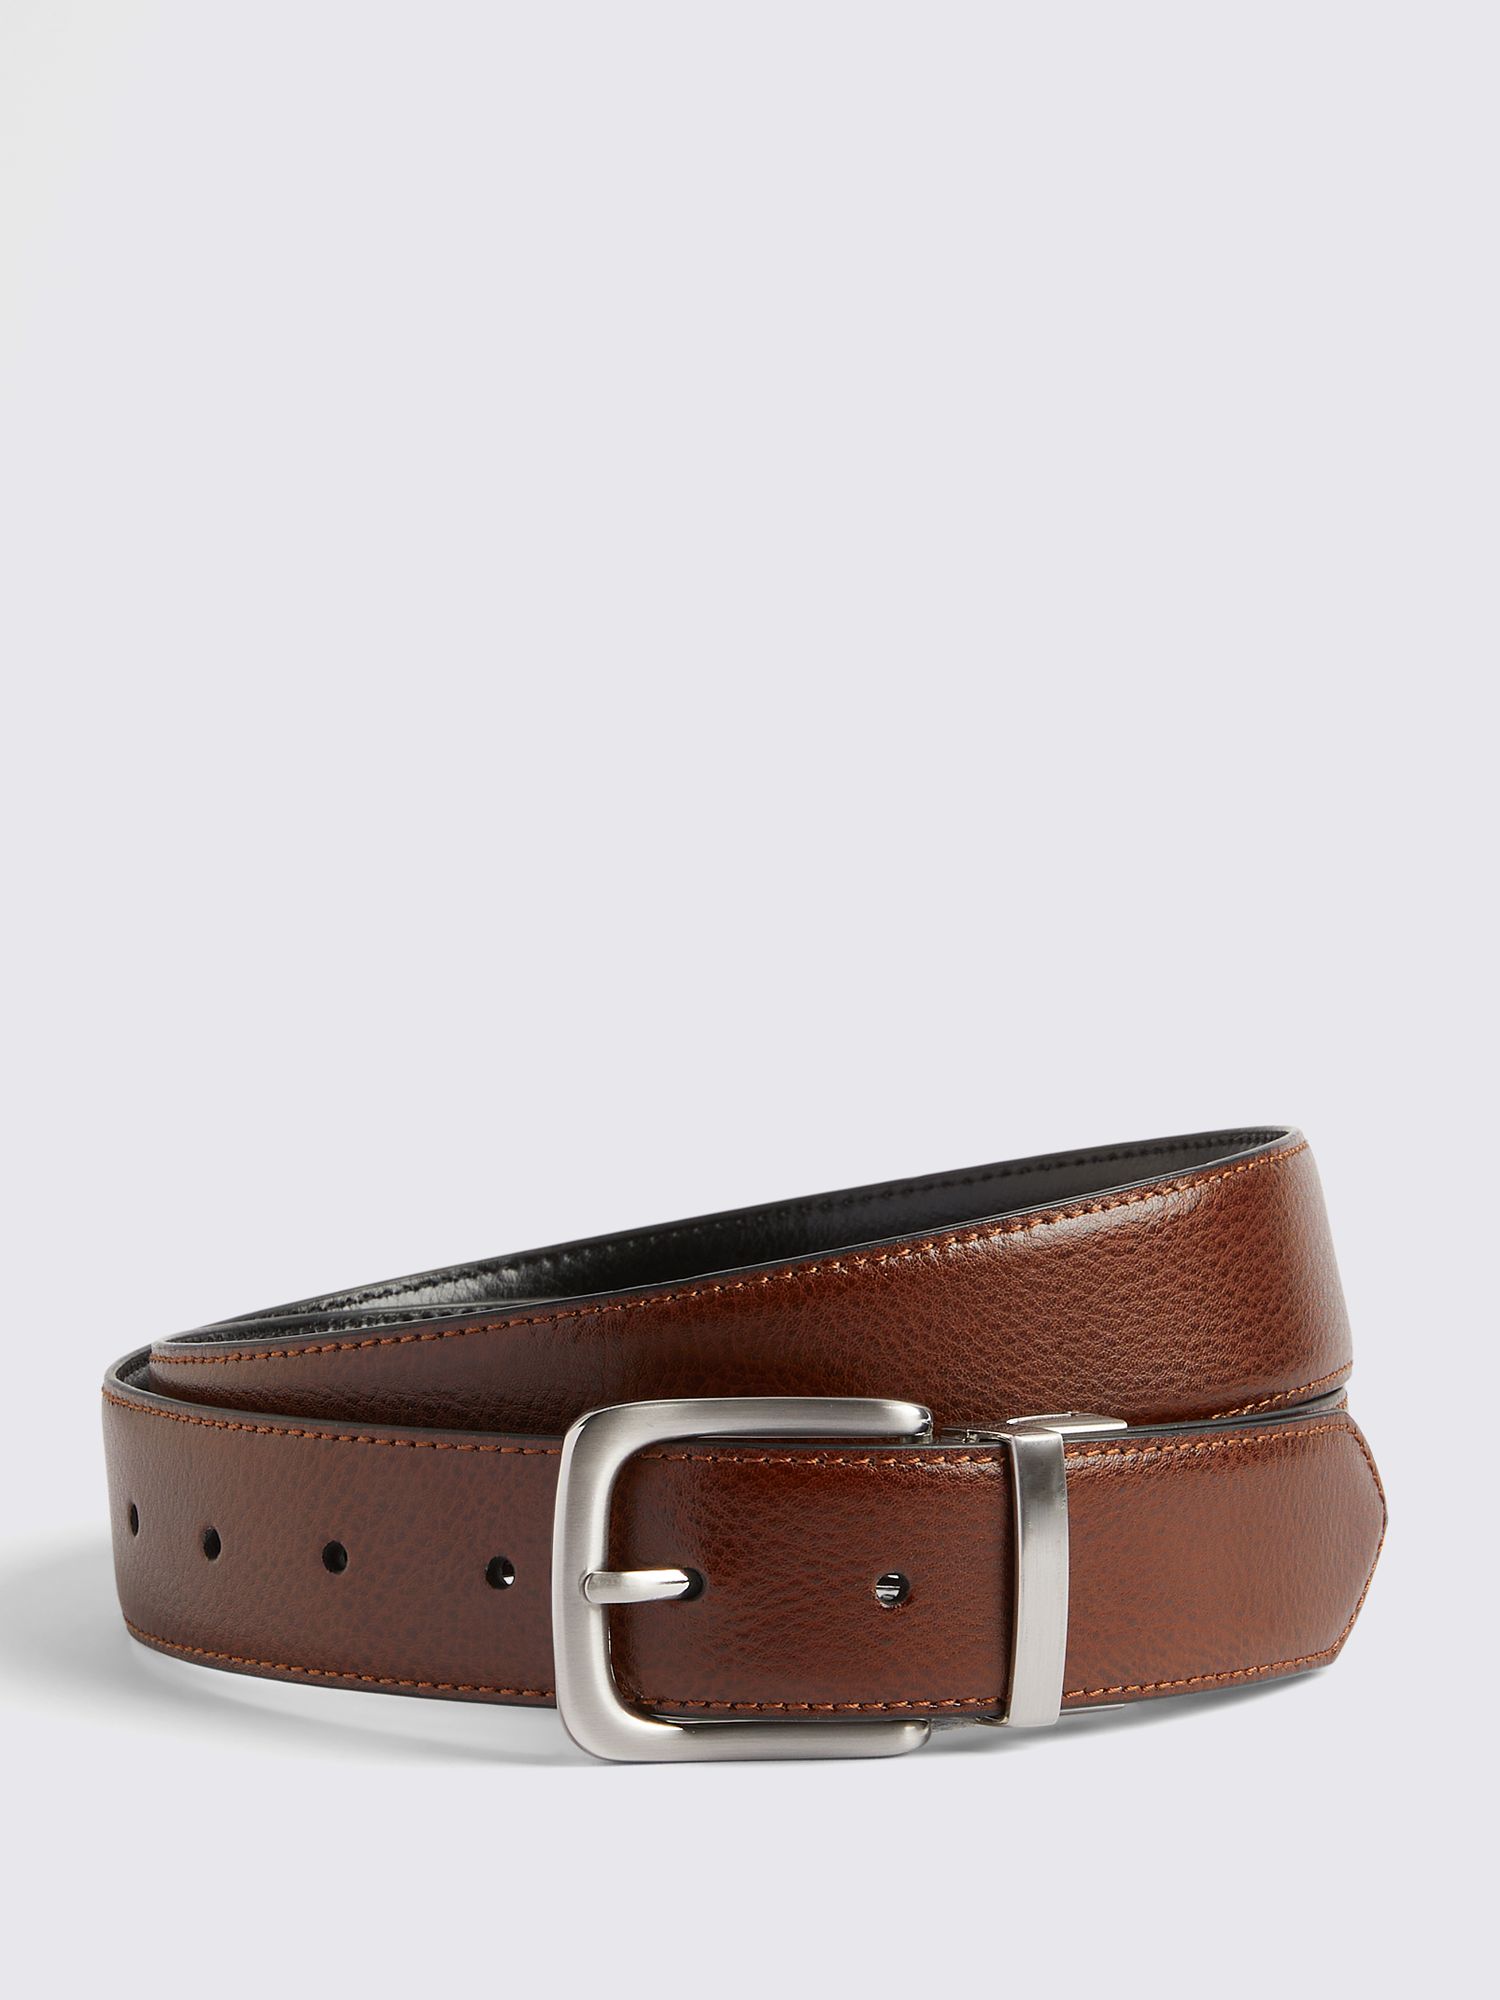 Moss Casual Leather Reversible Belt, Brown/Black, S